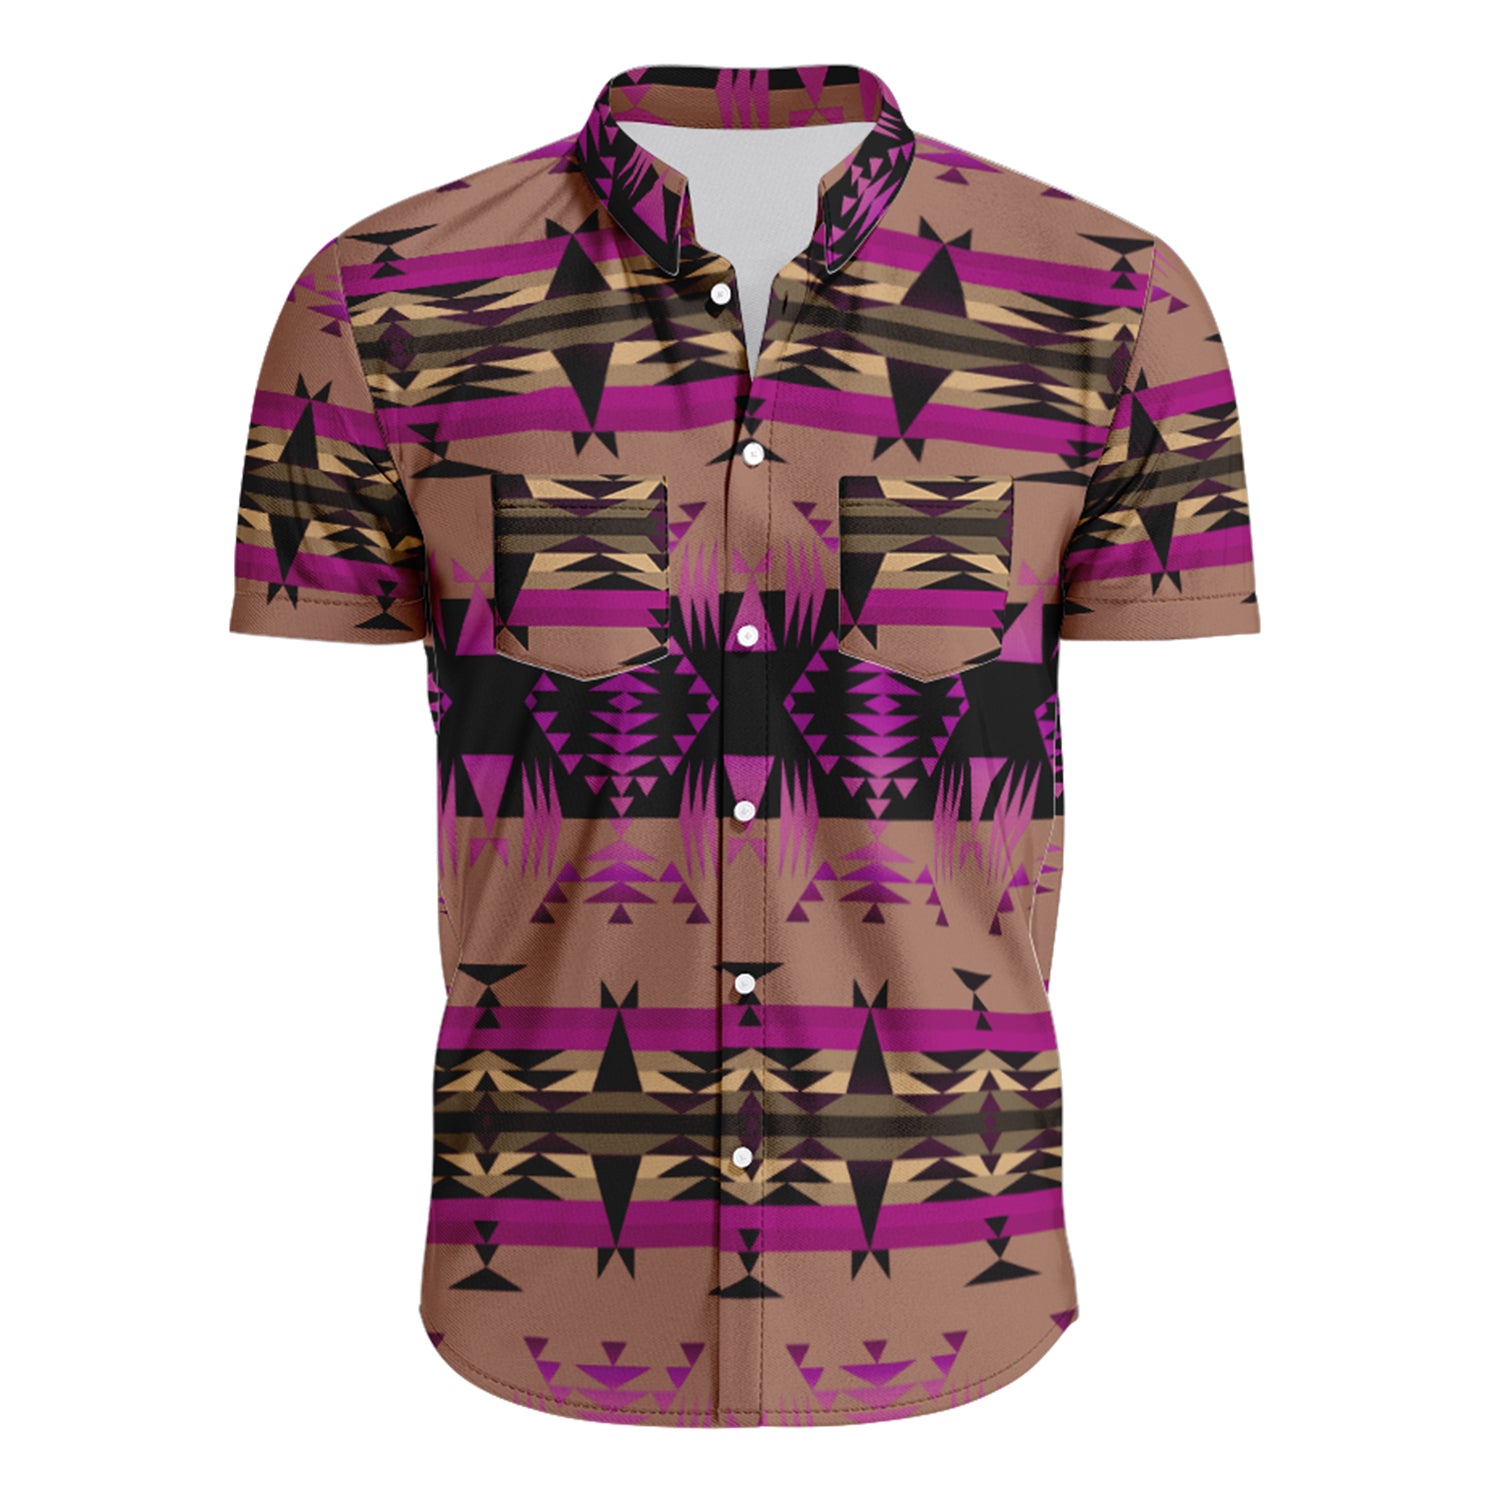 Between the Mountains Berry Hawaiian-Style Button Up Shirt